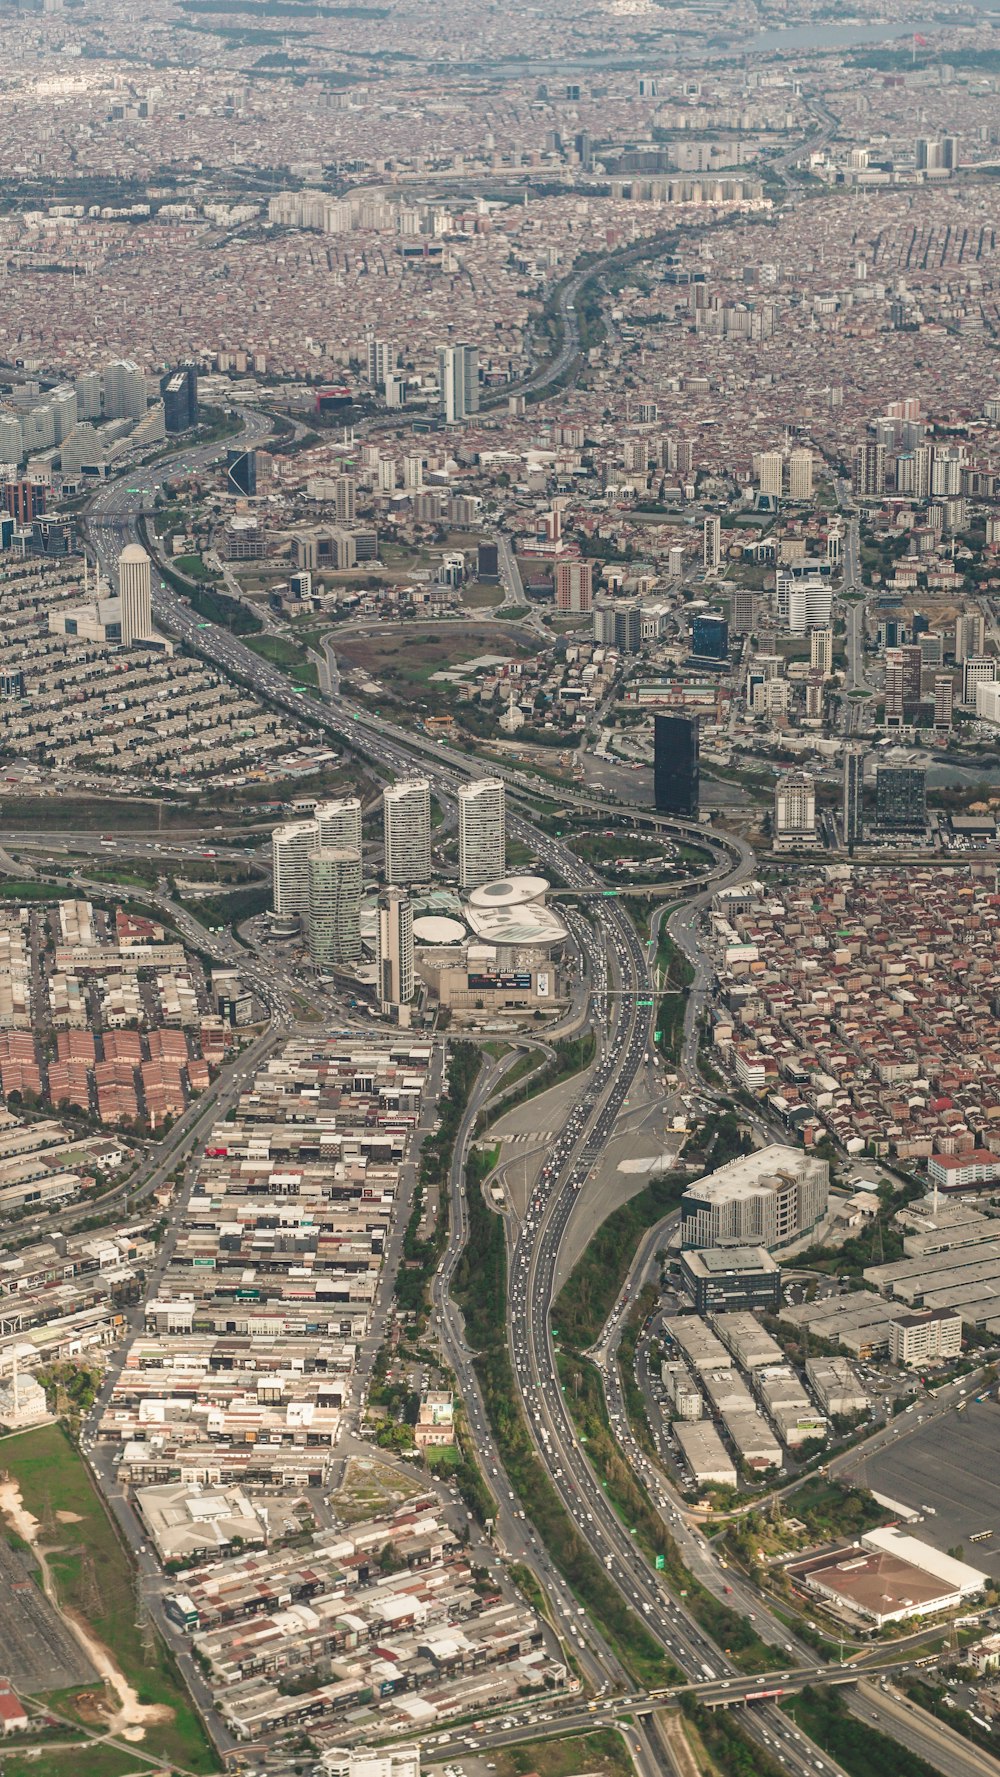 an aerial view of a city with lots of traffic